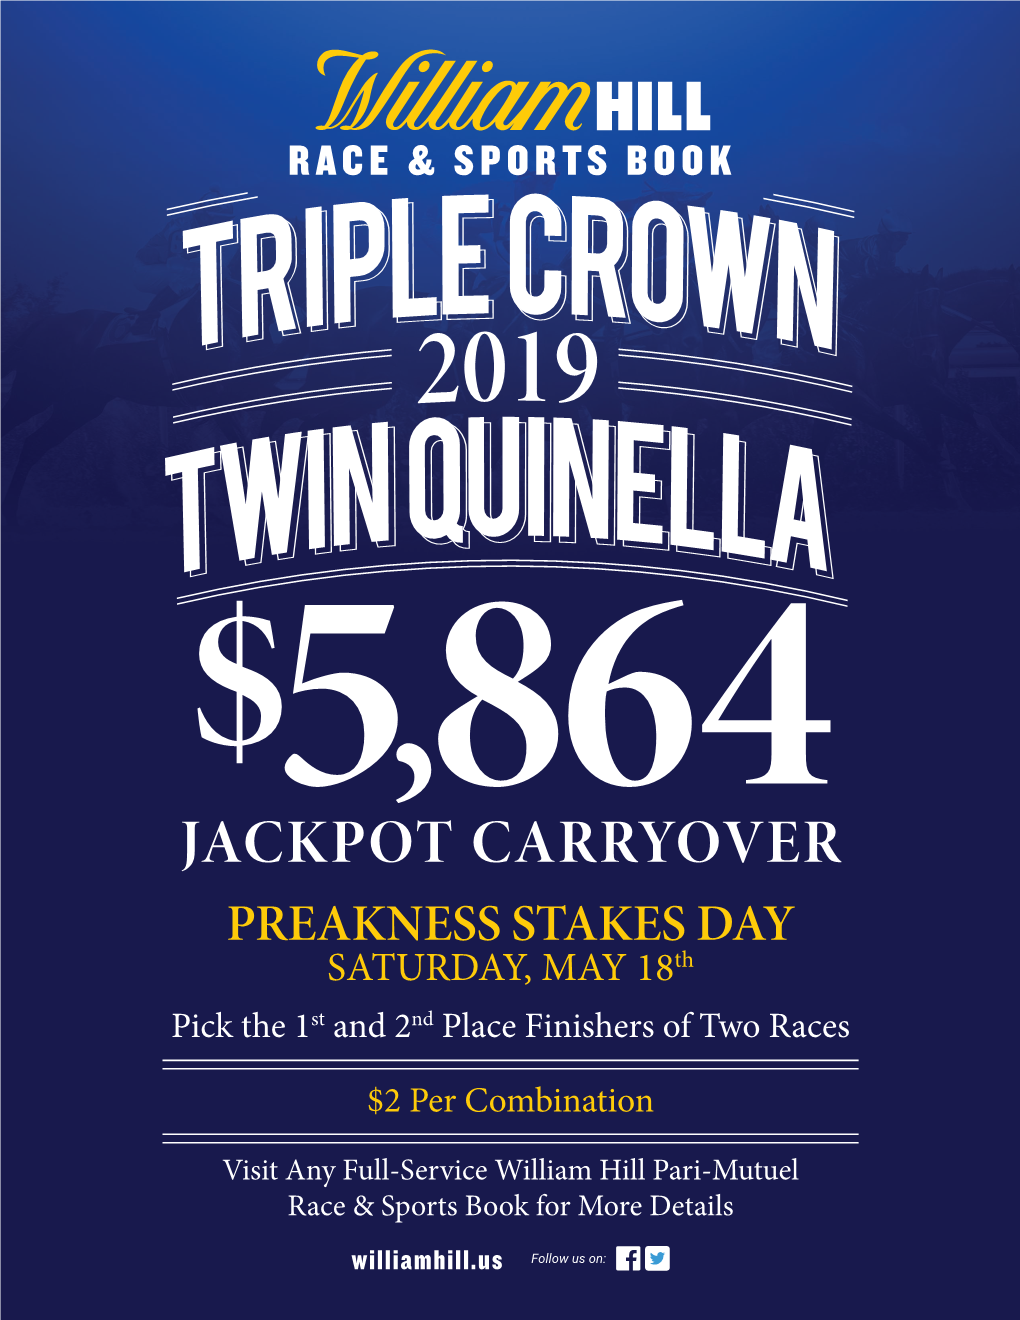 JACKPOT CARRYOVER PREAKNESS STAKES DAY SATURDAY, MAY 18Th Pick the 1St and 2Nd Place Finishers of Two Races